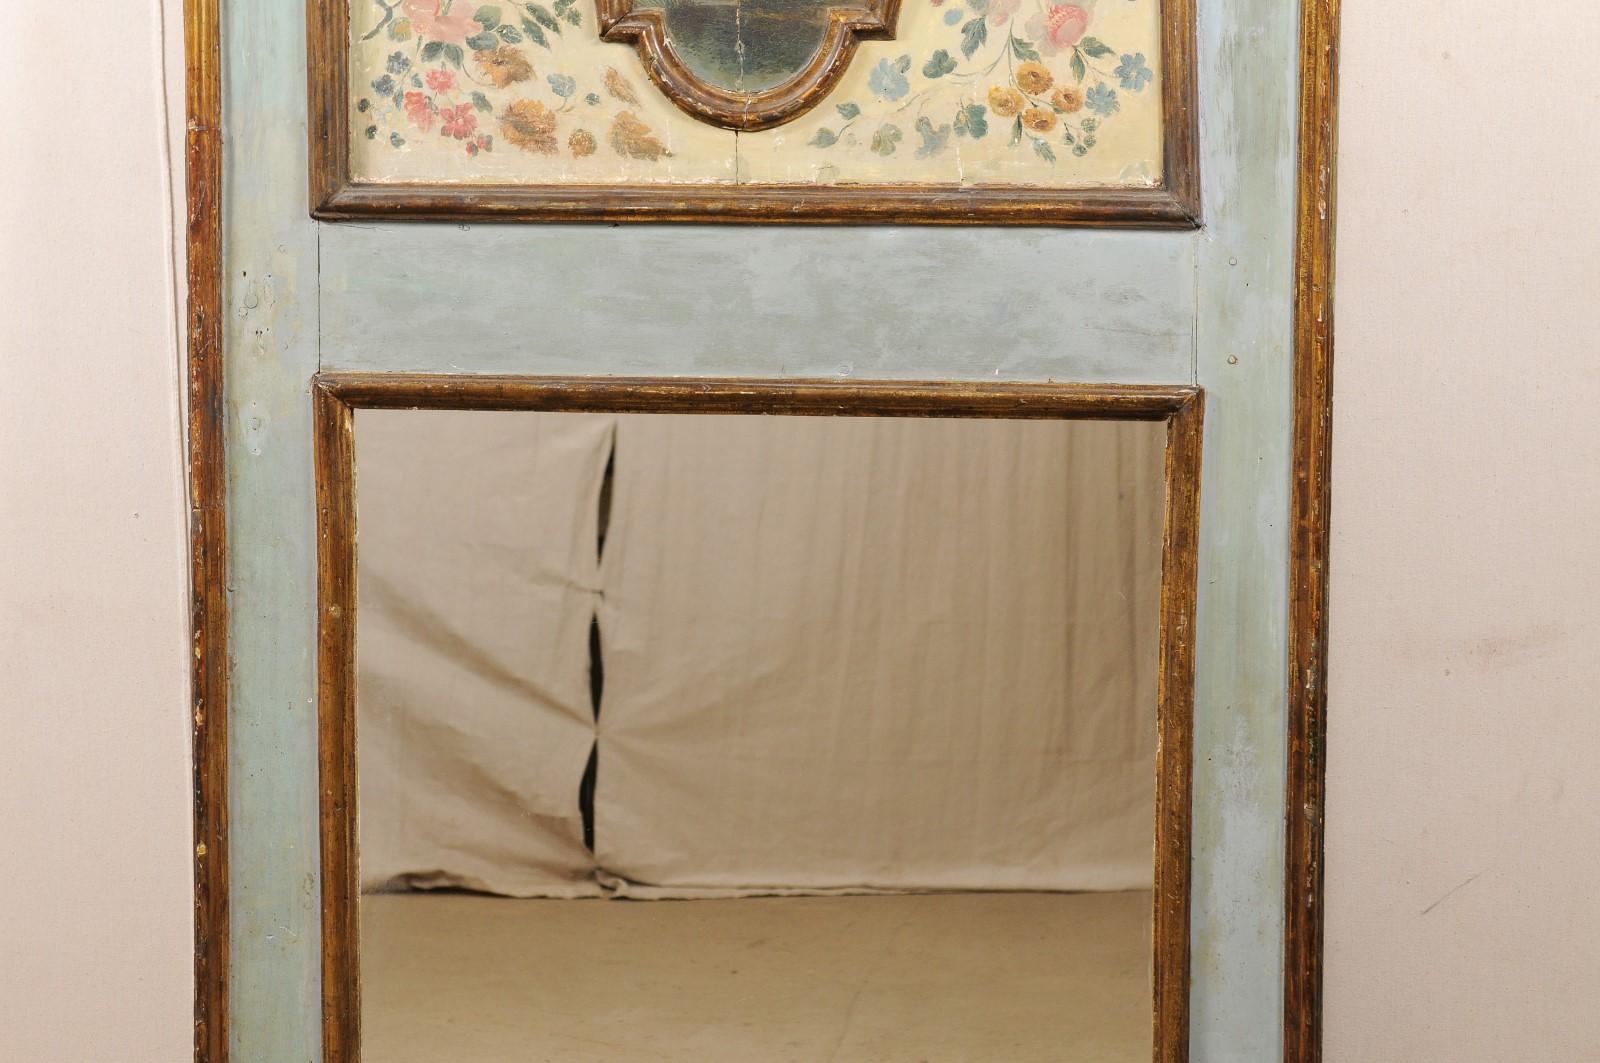 Italian 19th C. Pier Mirror w/ Serene Landscape Oil Painting at Top Panel In Good Condition For Sale In Atlanta, GA